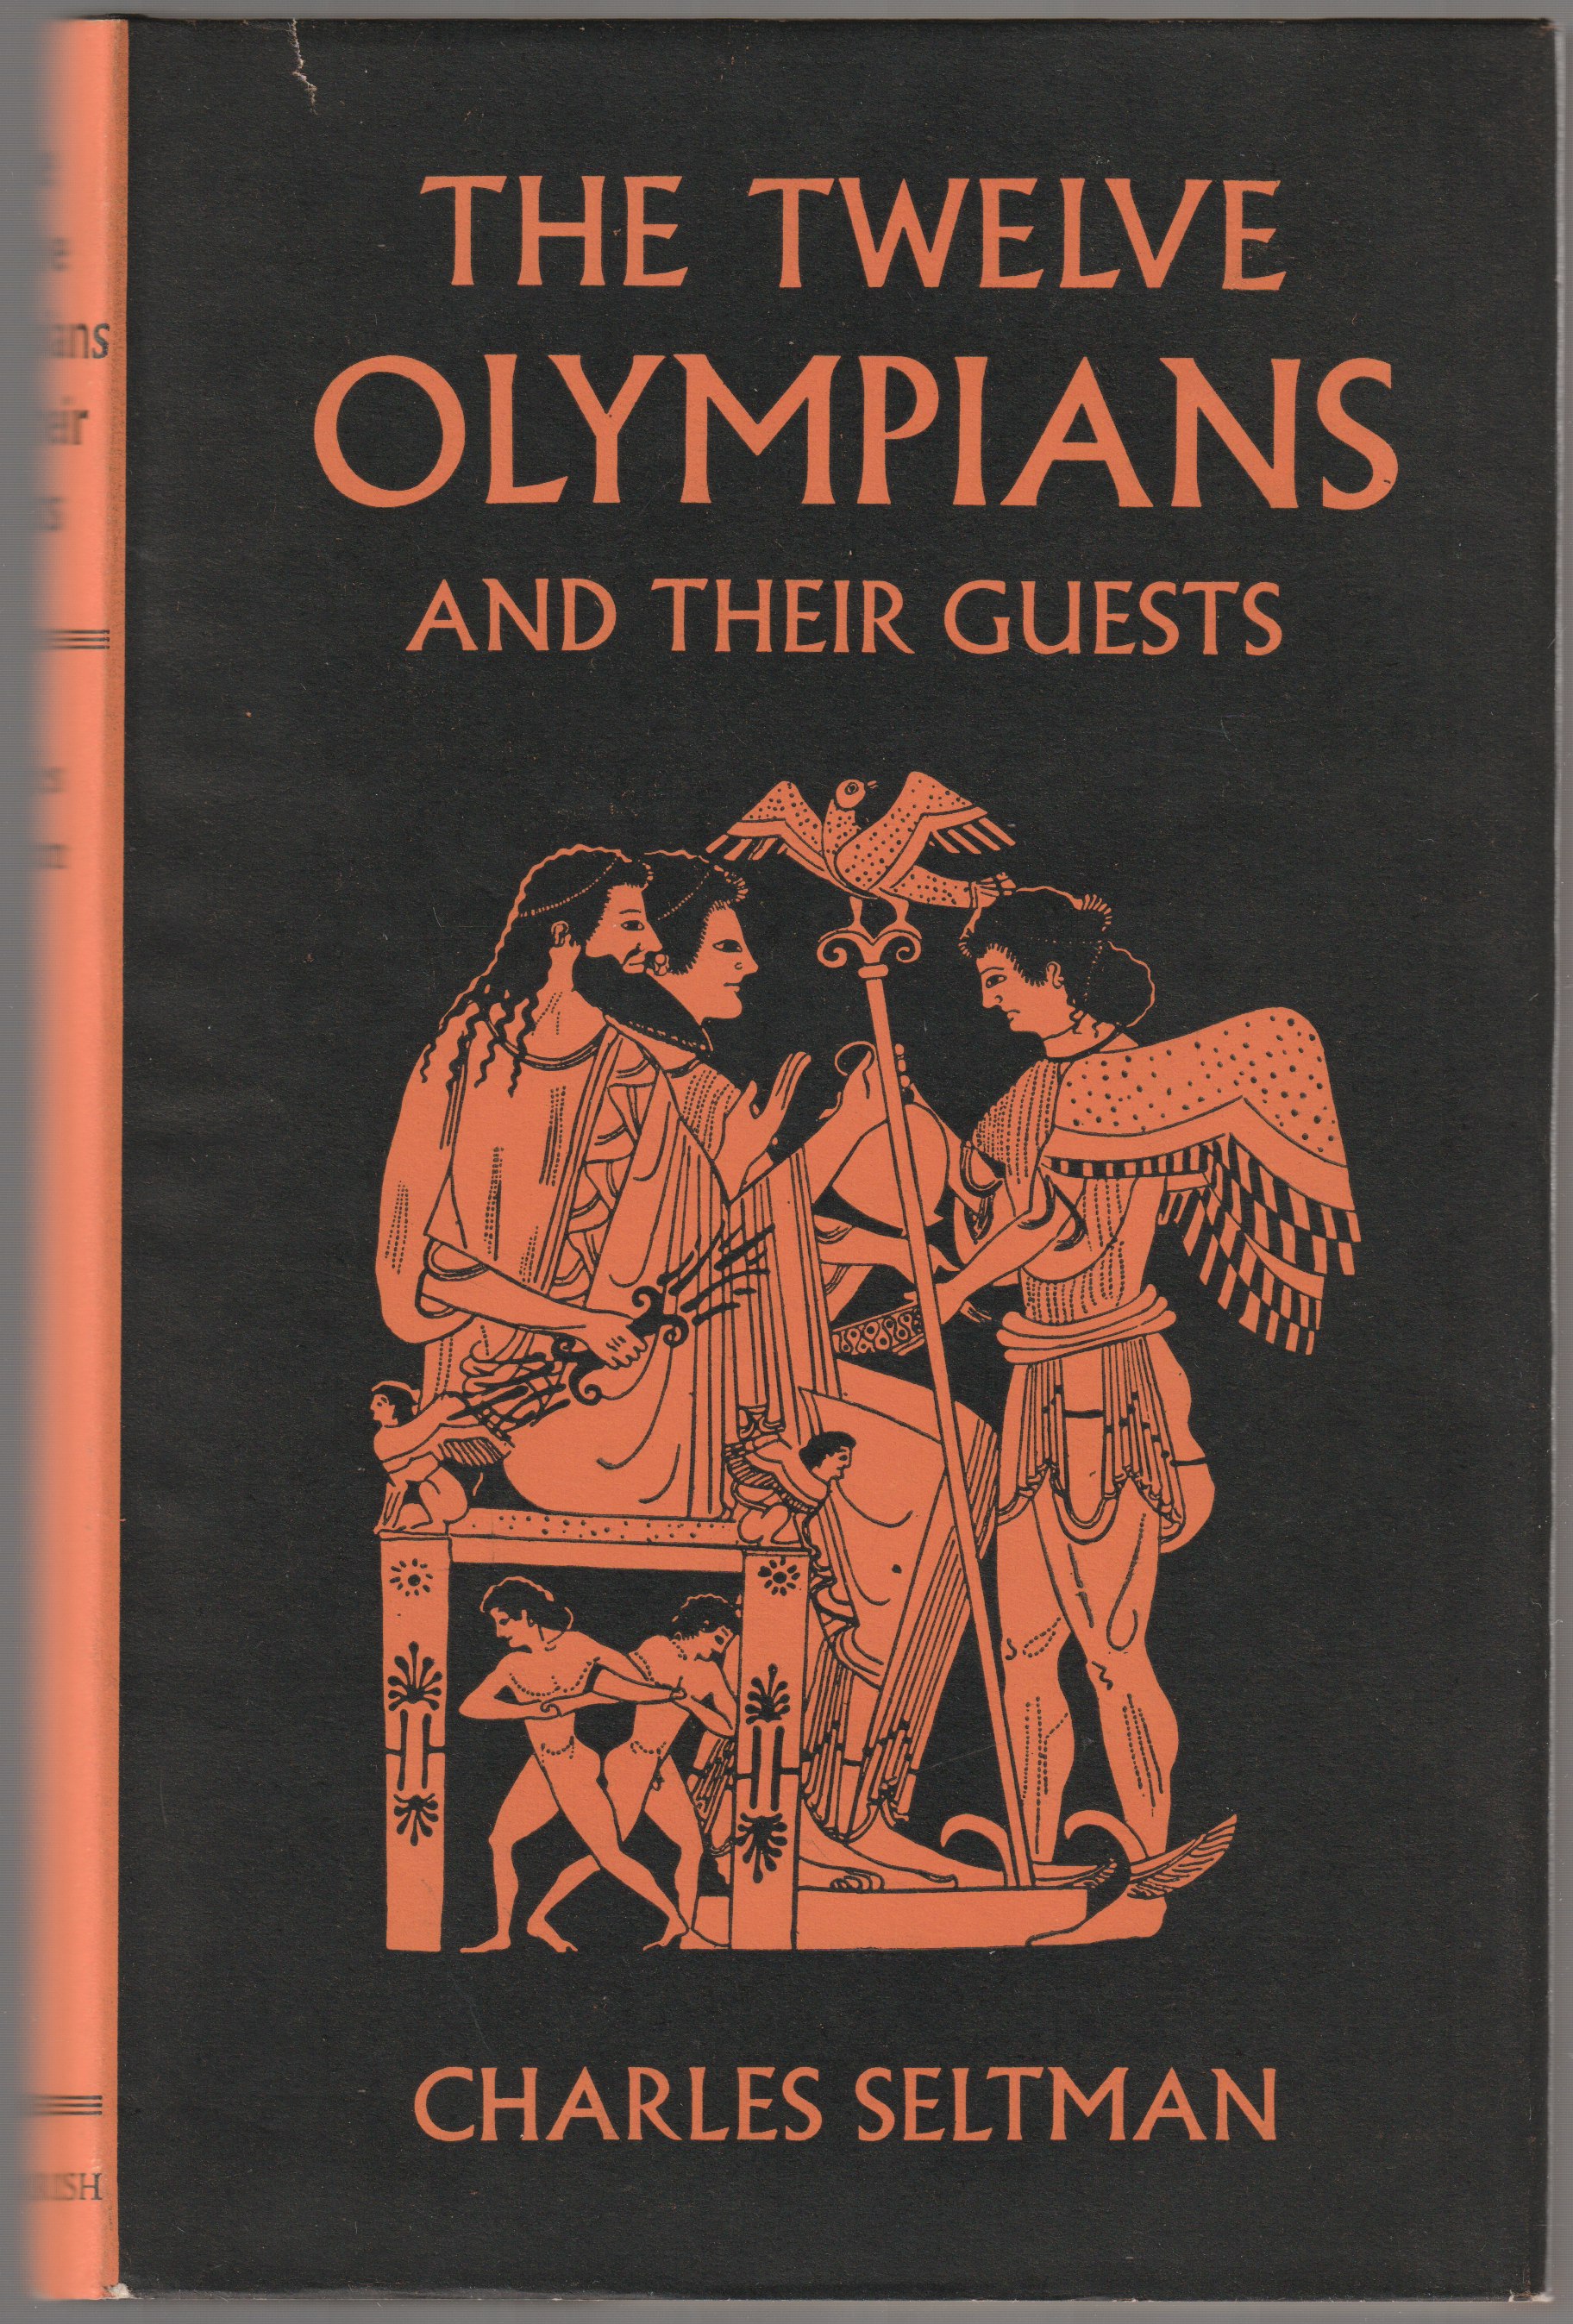 The twelve Olympians and their guests.